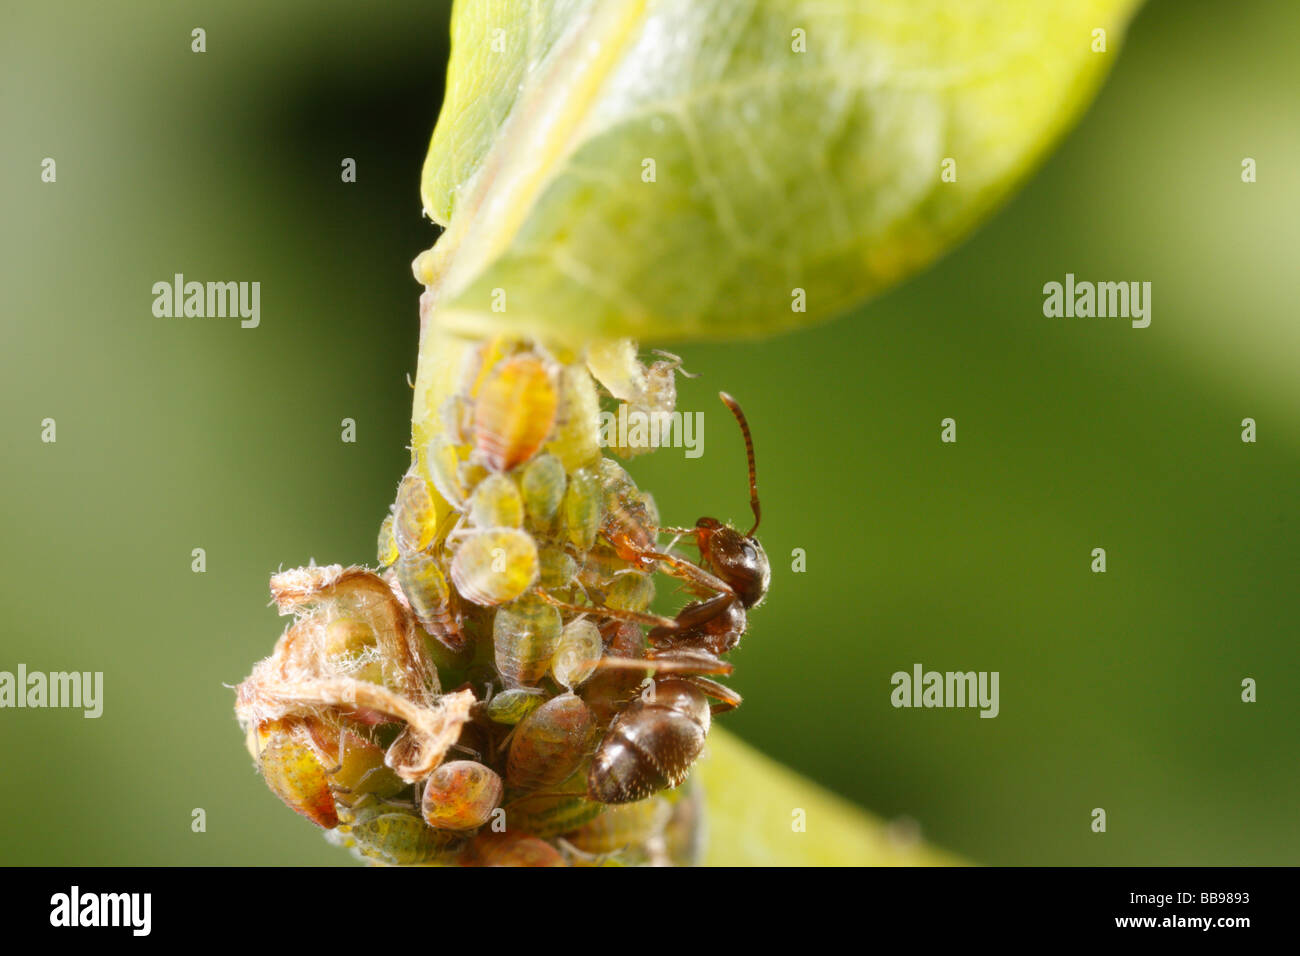 Ant milking aphids. The ant is Lasius niger, a black garden ant. Stock Photo